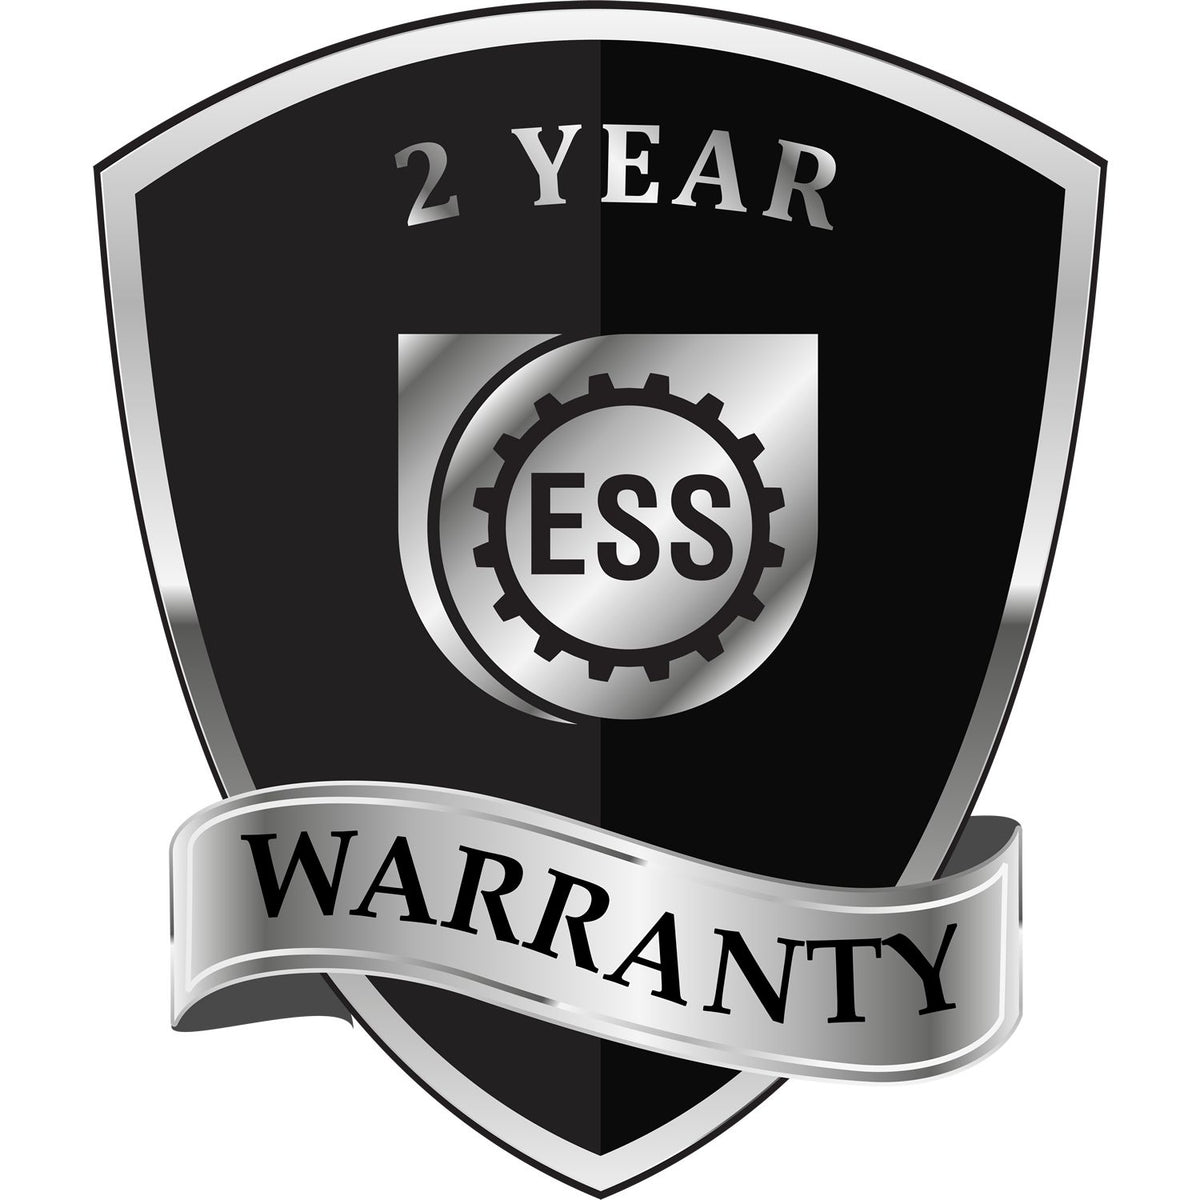 A black and silver badge or emblem showing warranty information for the Hybrid Tennessee Landscape Architect Seal